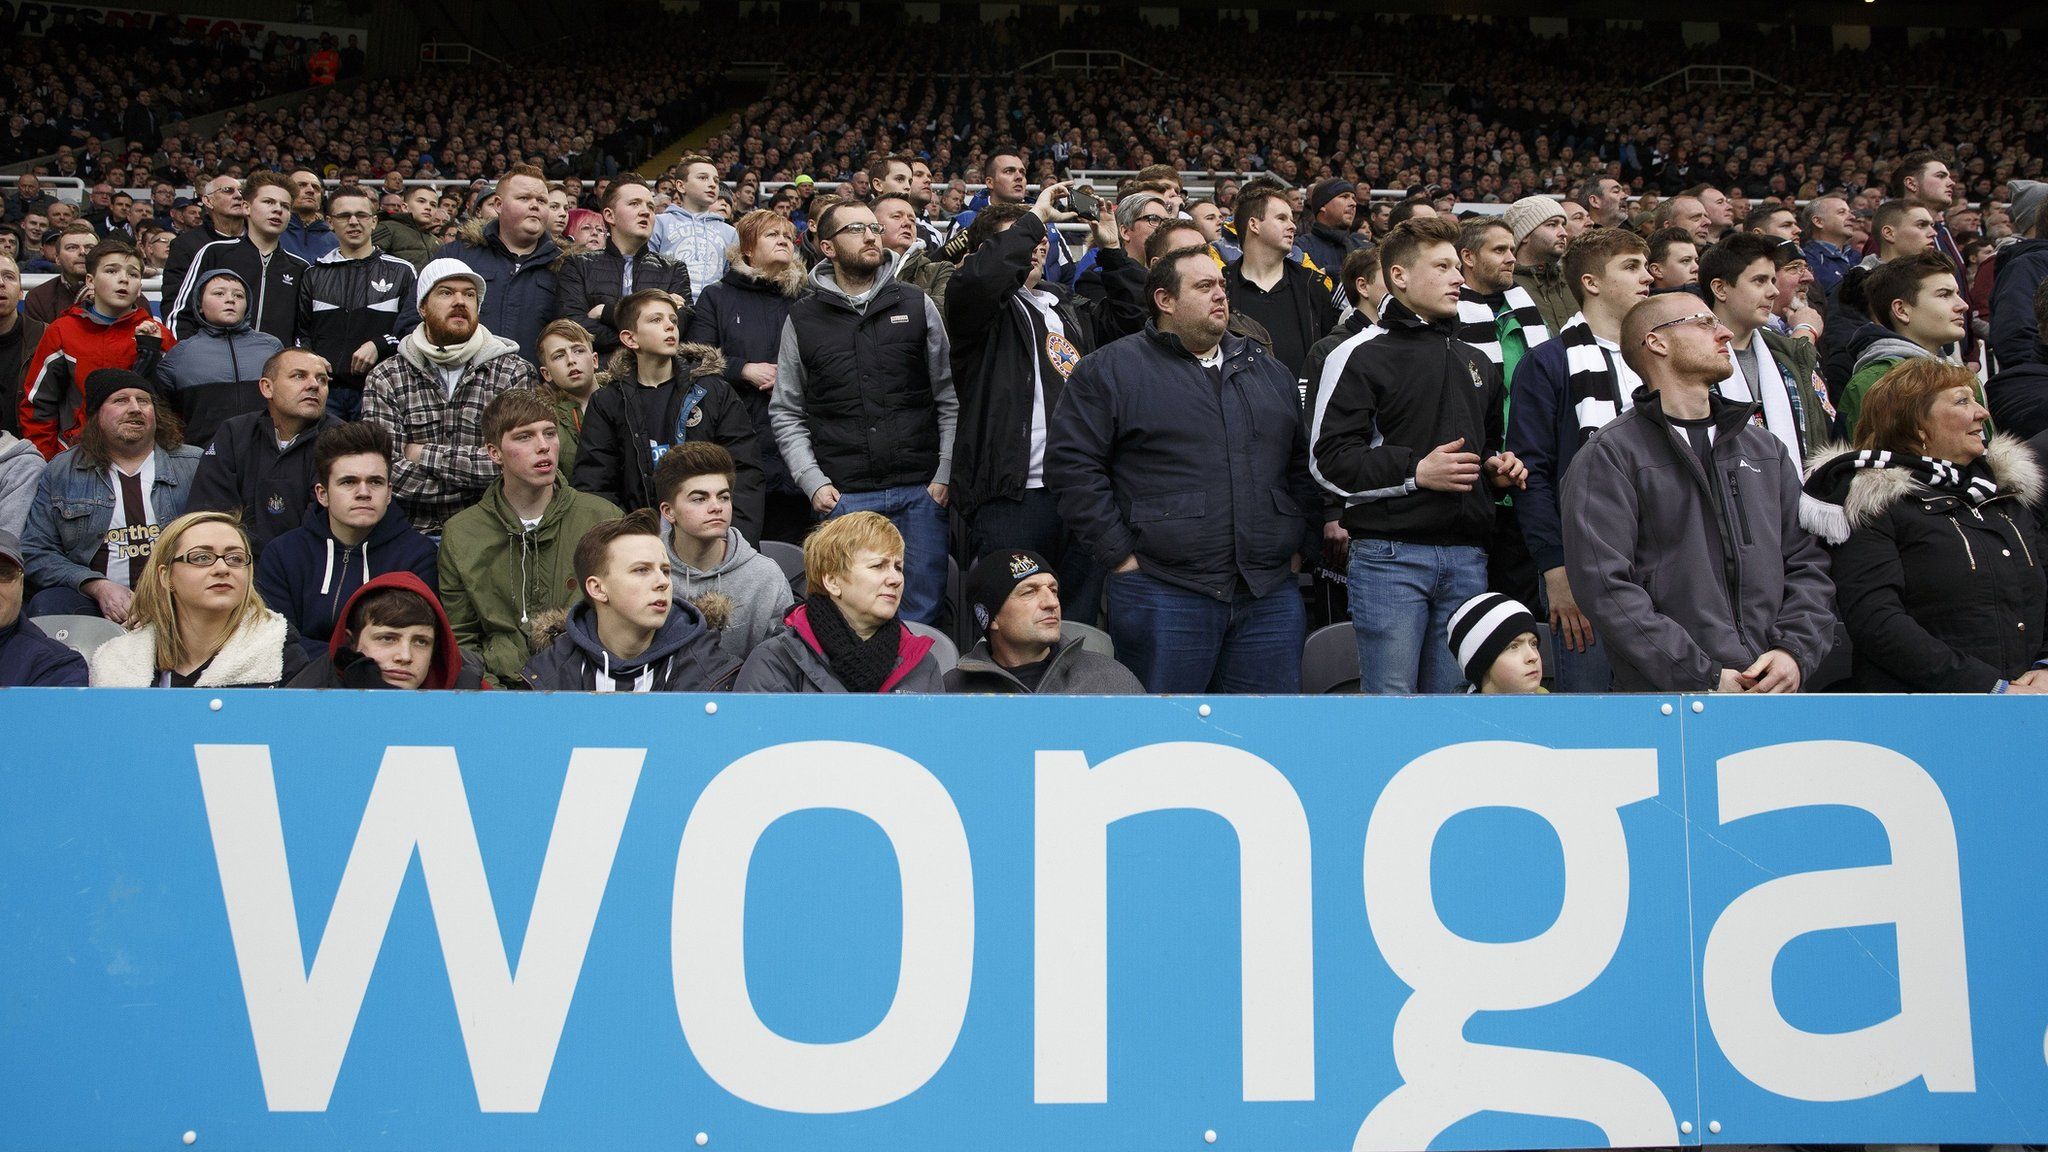 Wonga ended its sponsorship of Newcastle United in 2016